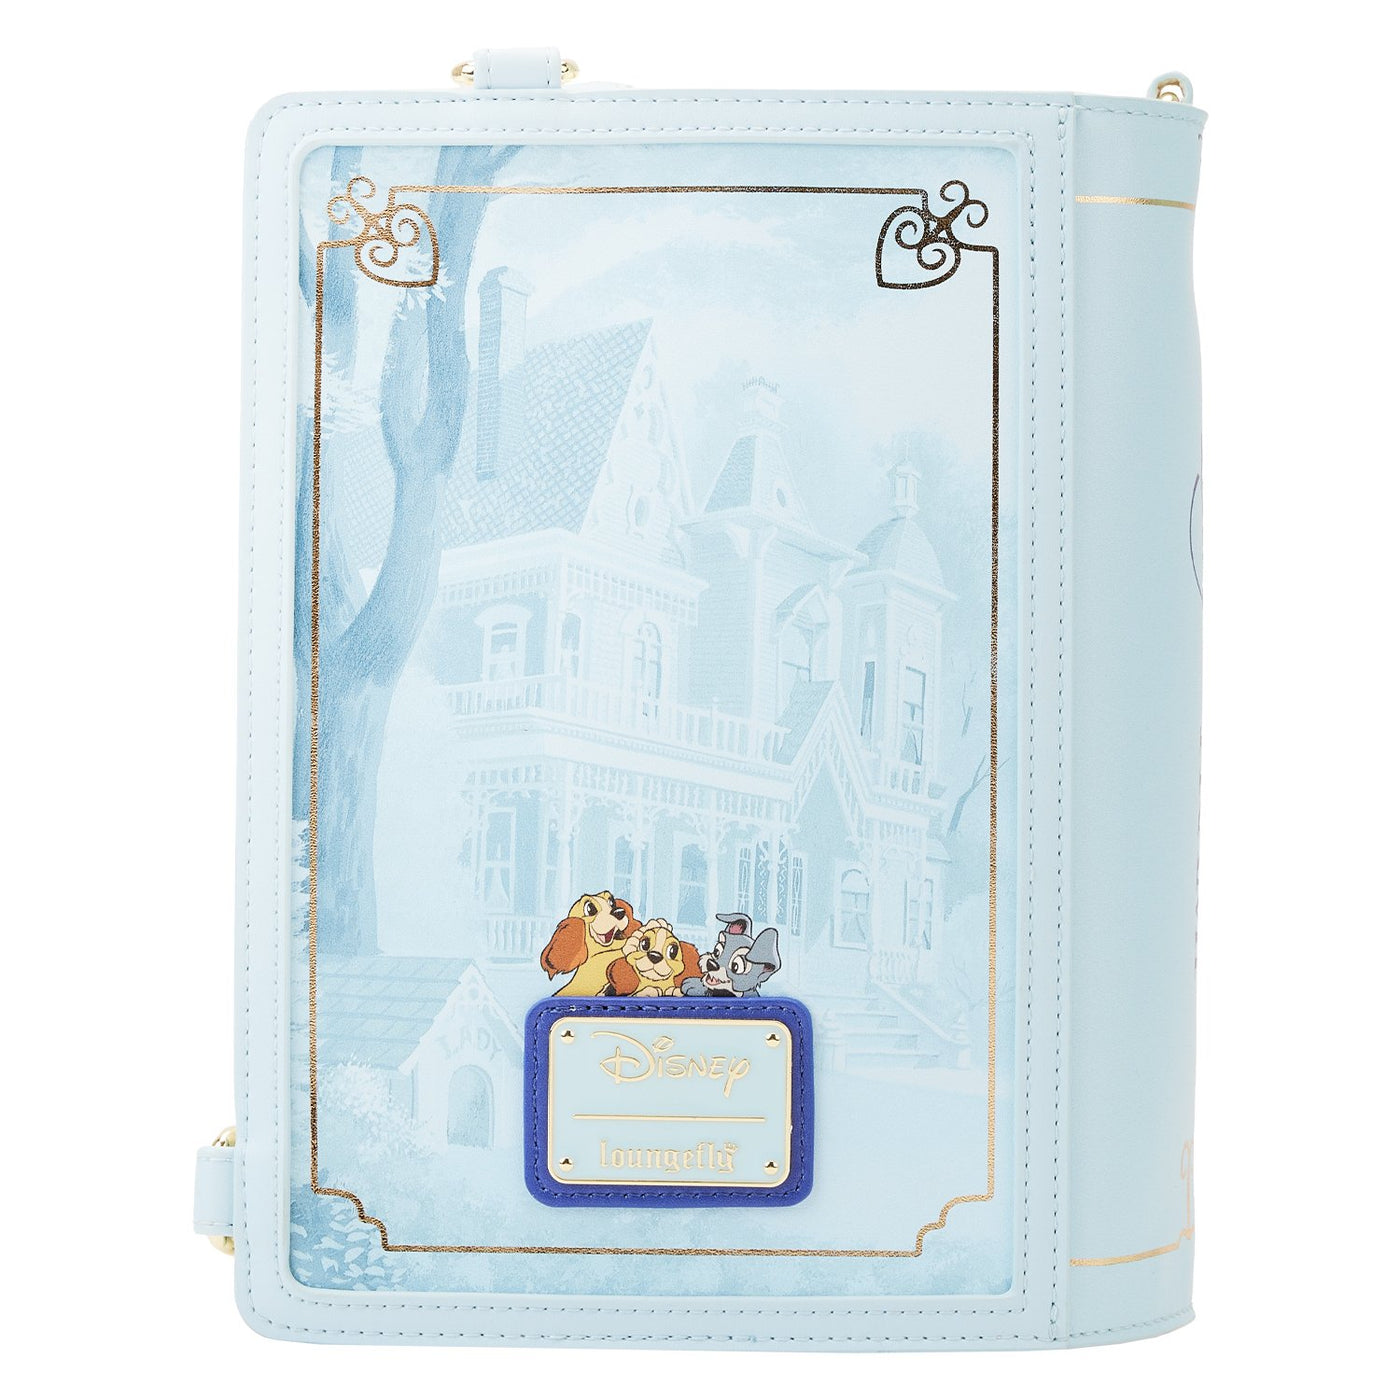 671803448377 - Loungefly Disney Lady and the Tramp Classic Book Convertible Crossbody - Back